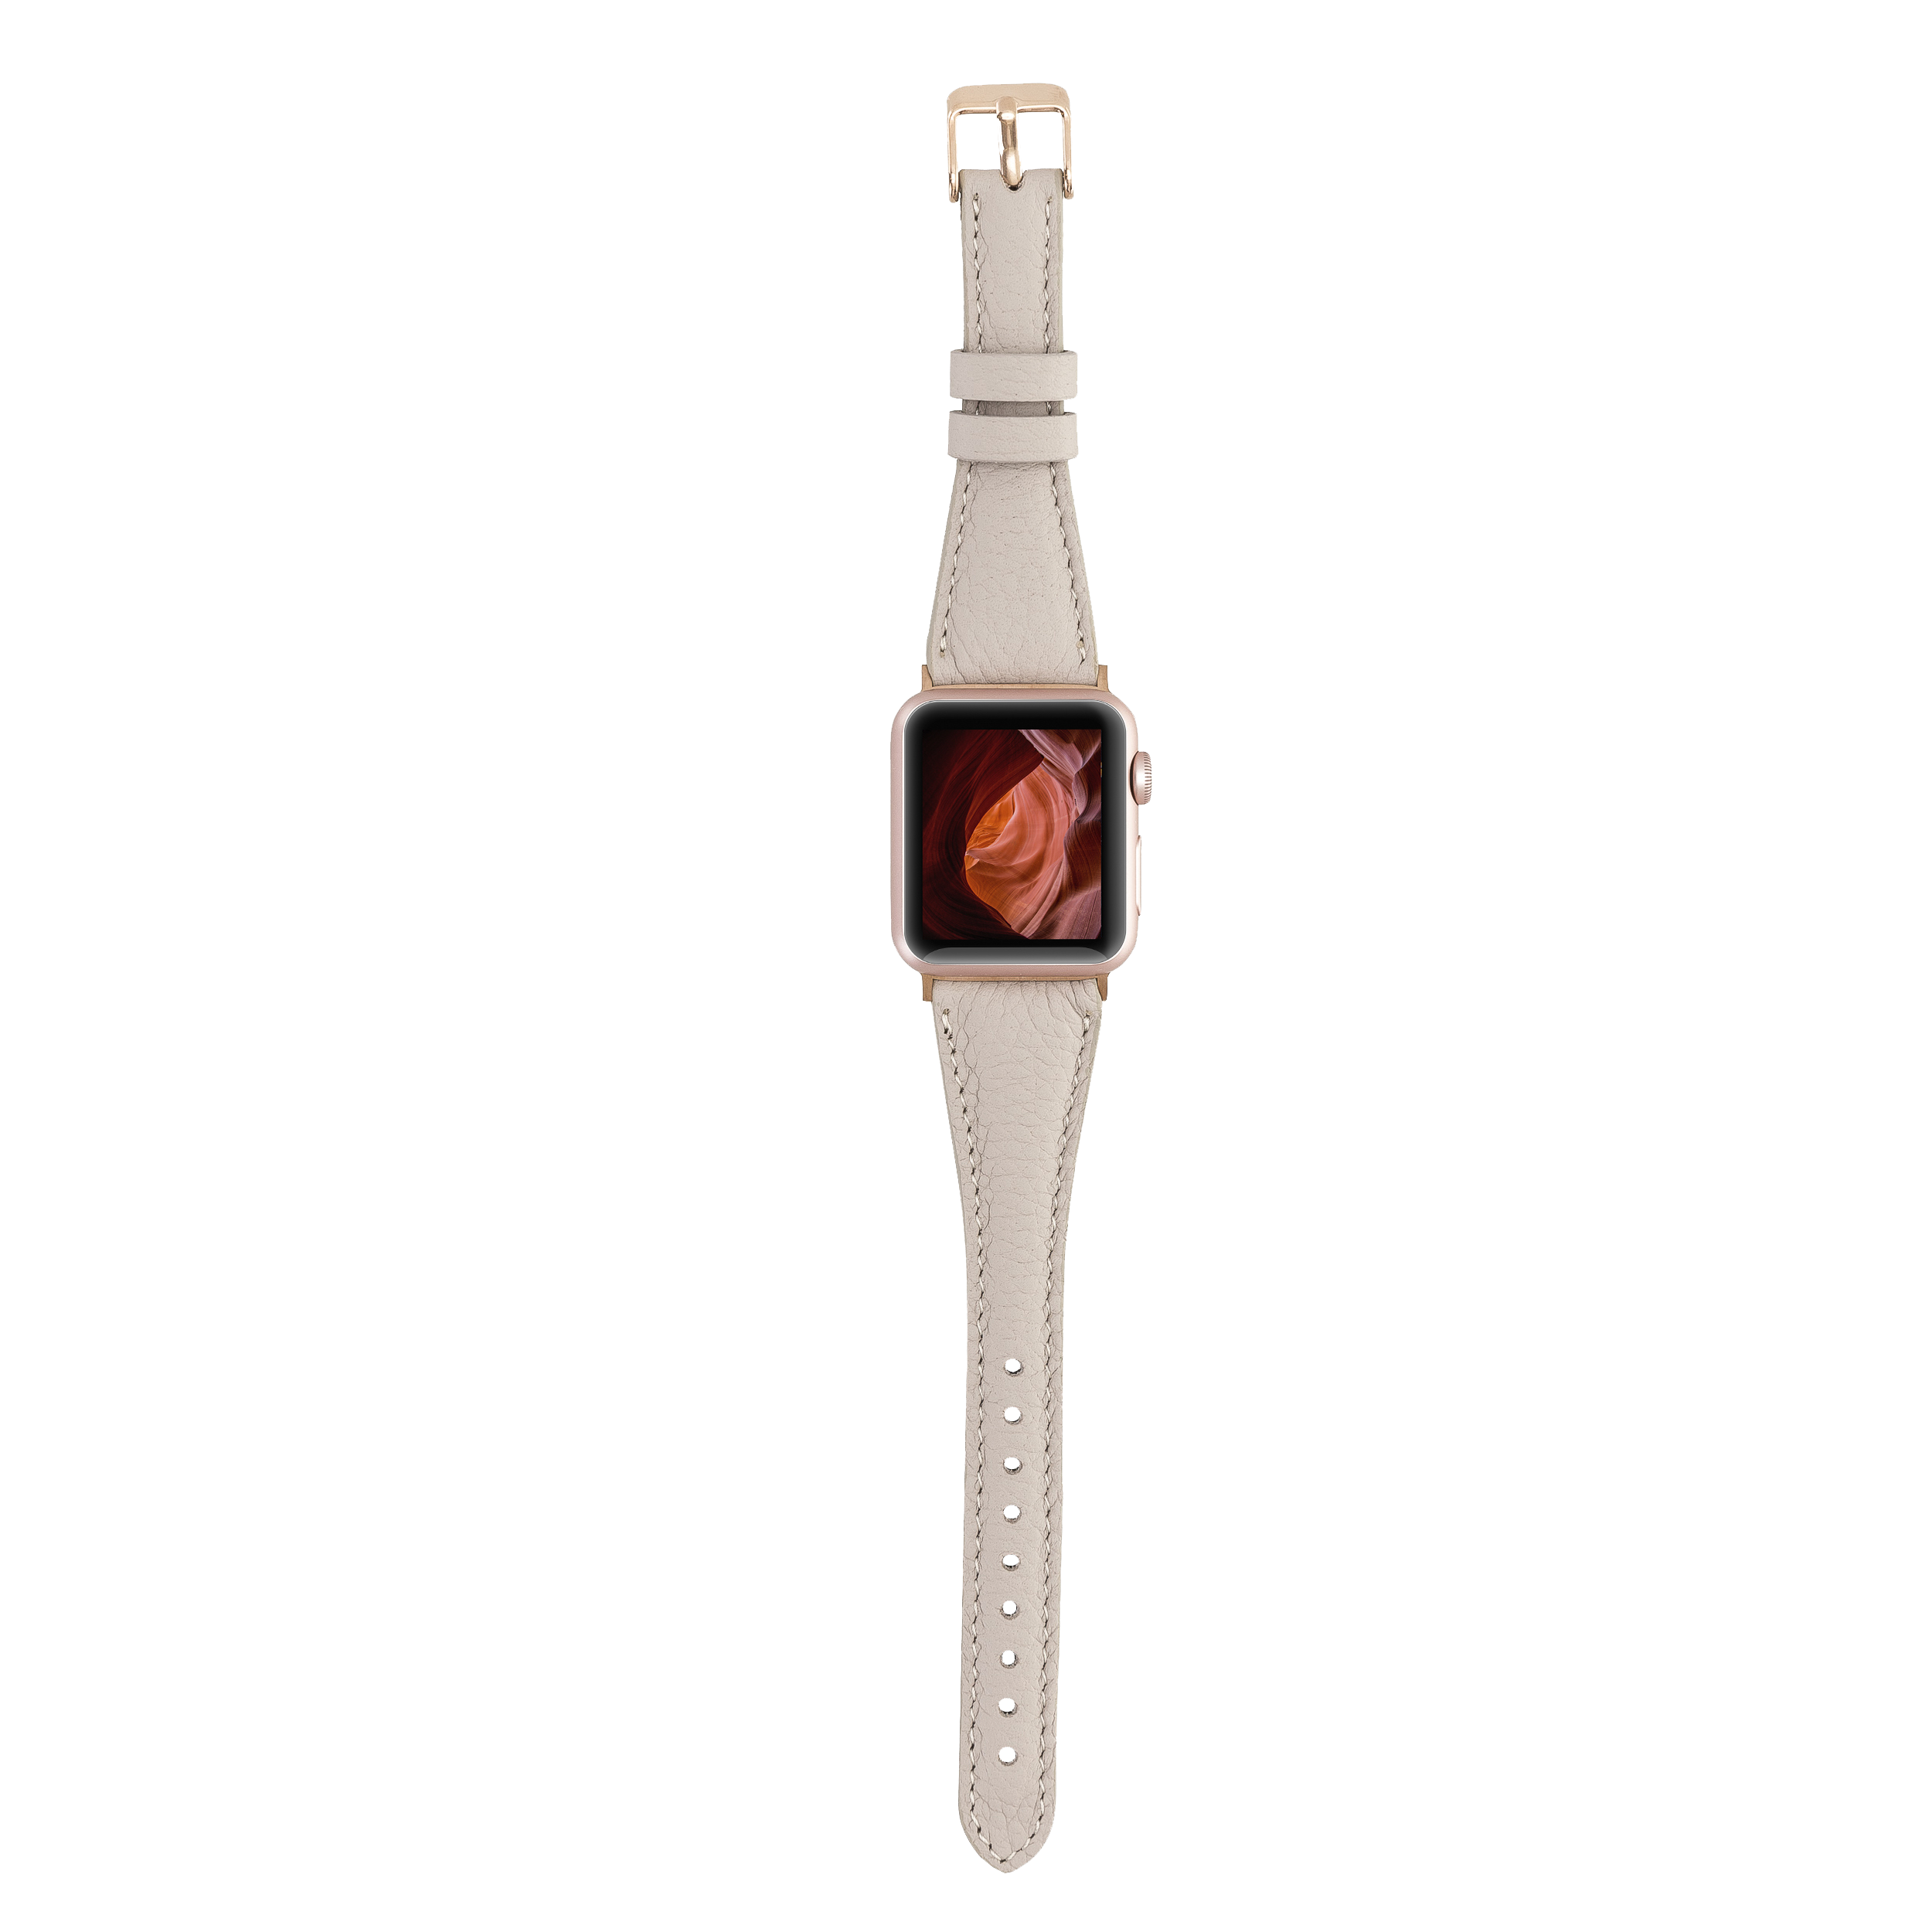 LupinnyLeather Beige Leather Watch Band for Apple Watch and Fitbit Versa 3 2 1 Watch Band 7